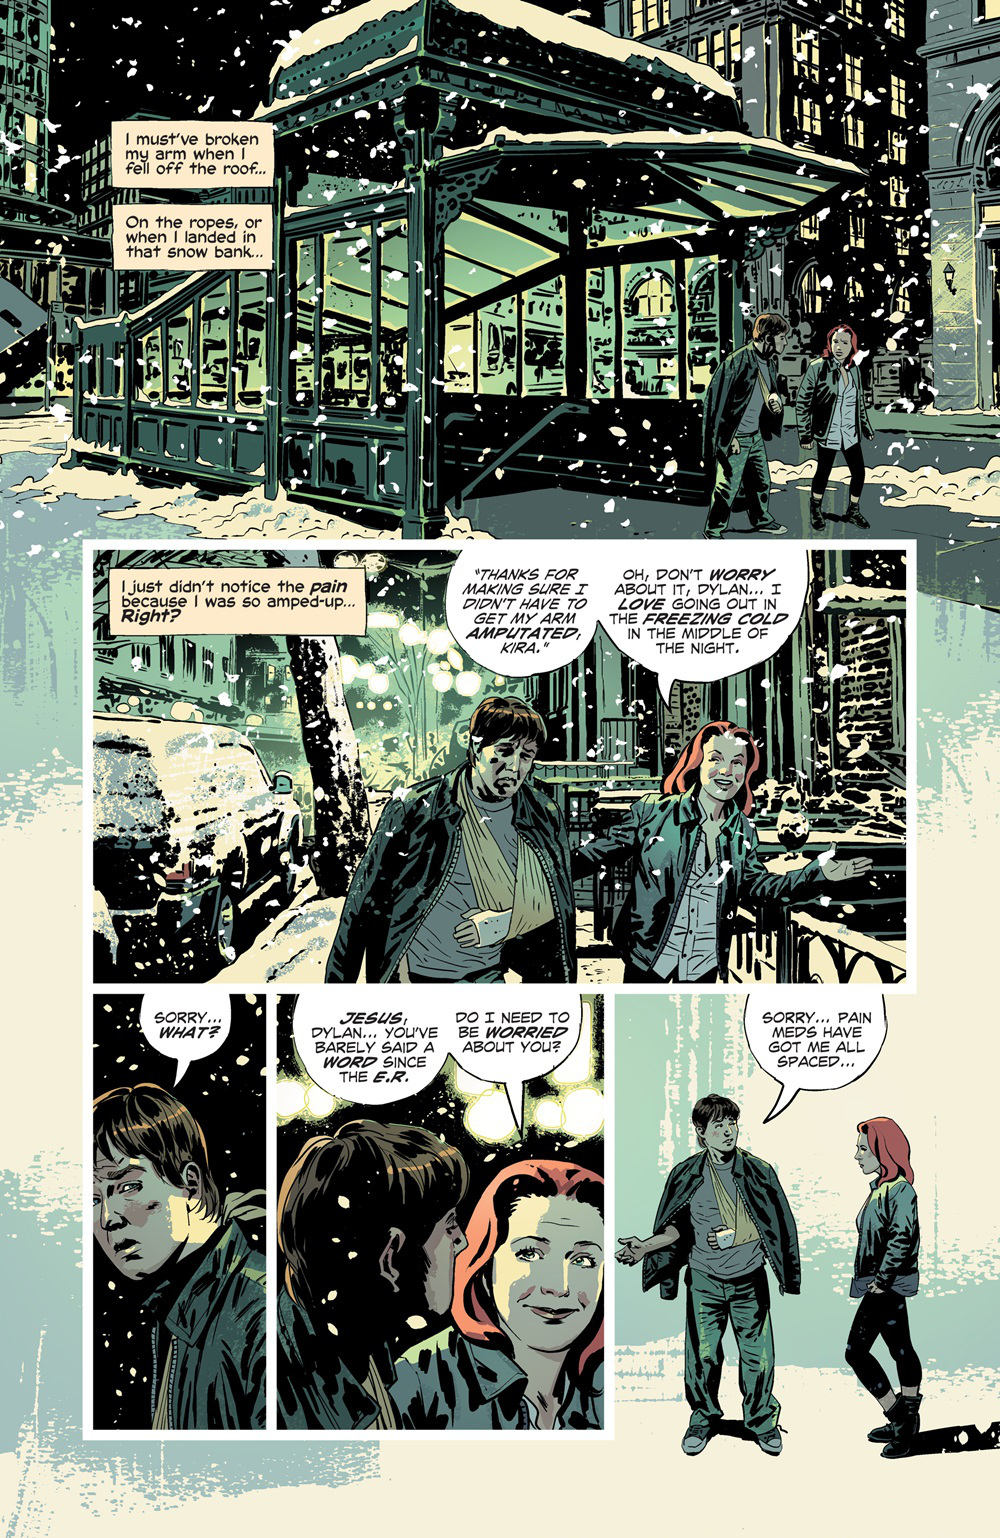 Kill or Be Killed comic book panel of an injured young man and a young woman walking and walking in a lightly colored city winter.